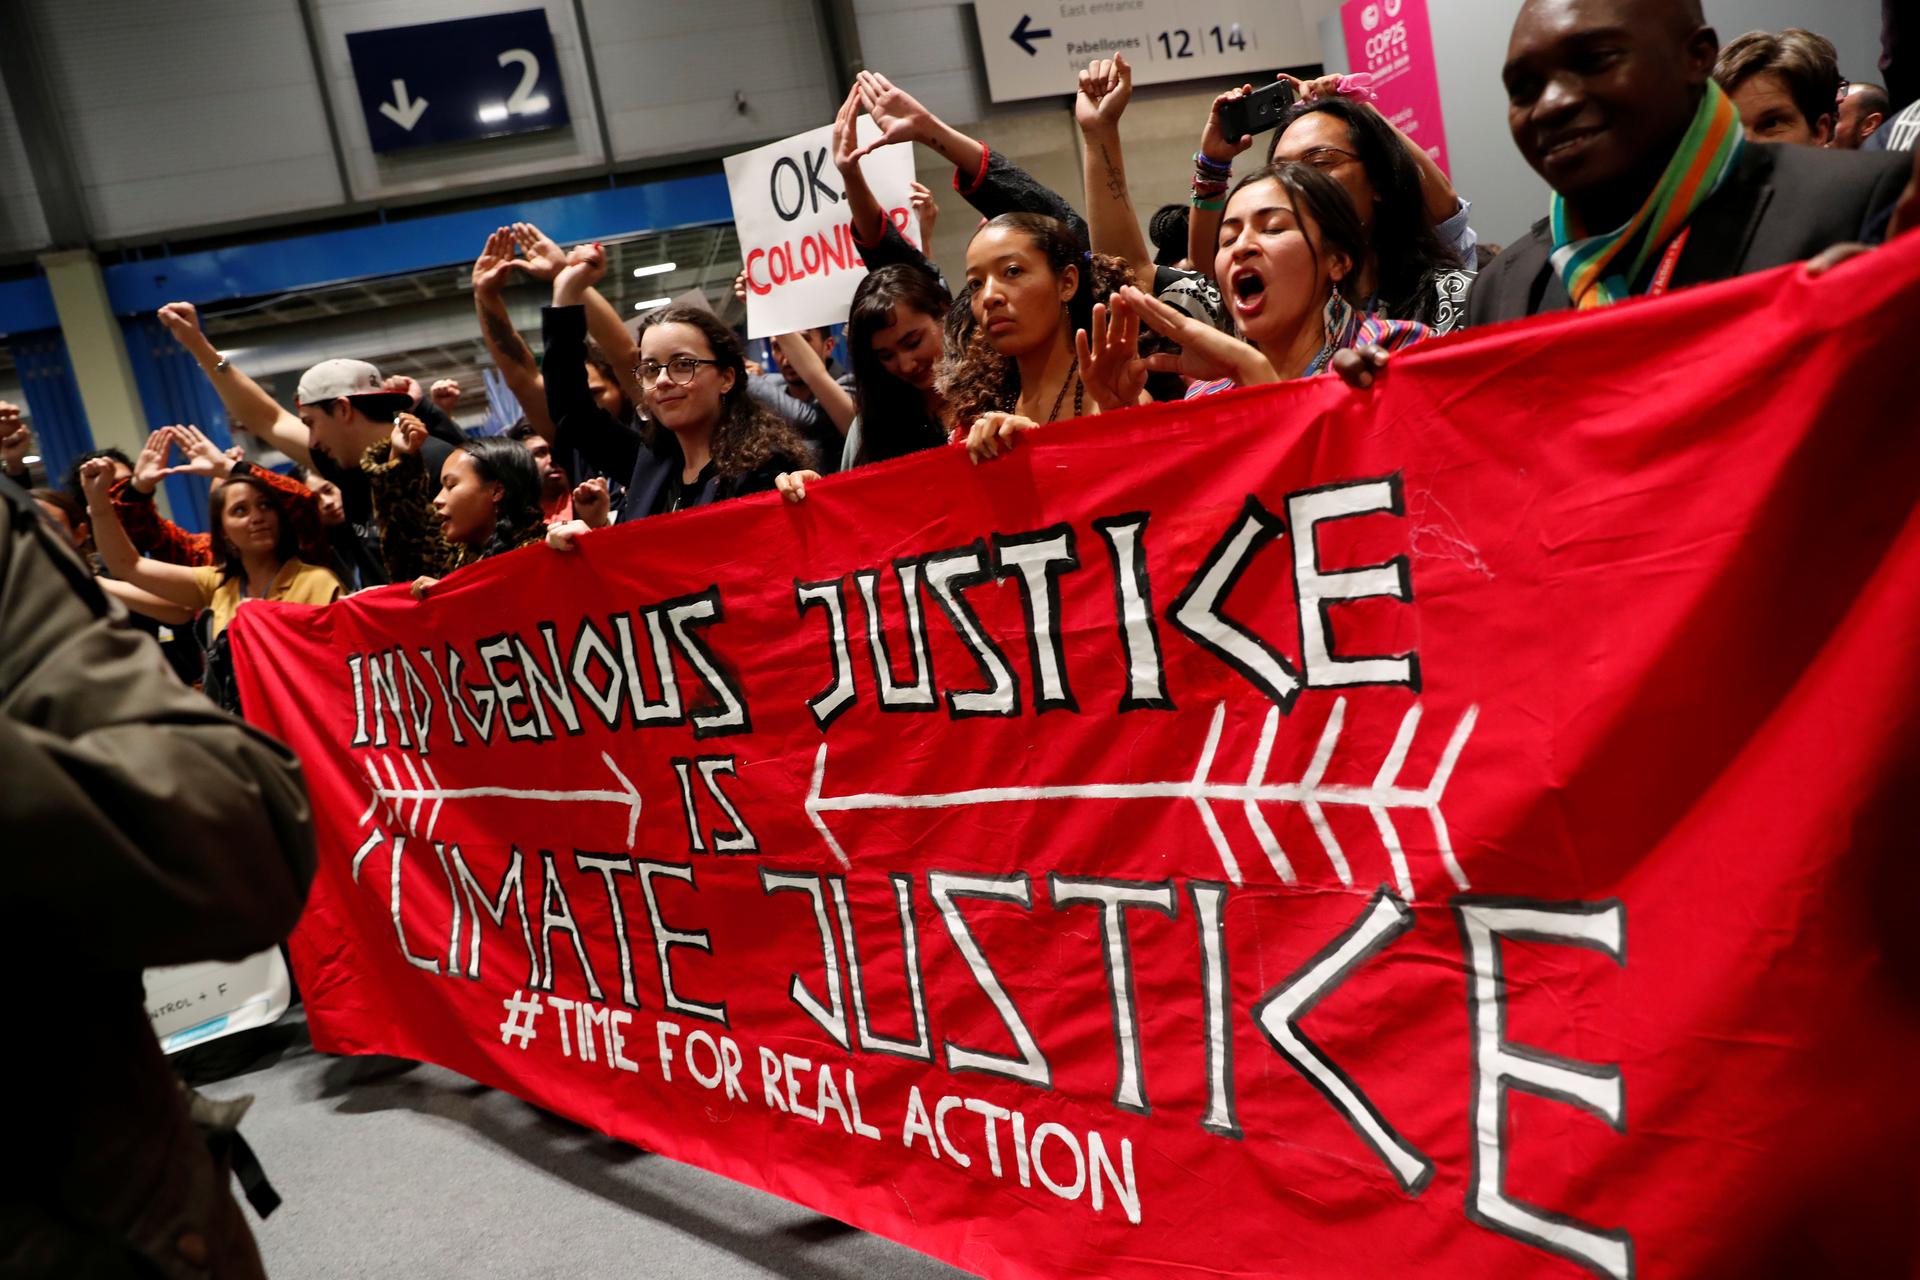 Protesters in Madrid climate talks hold large red banner as they walk